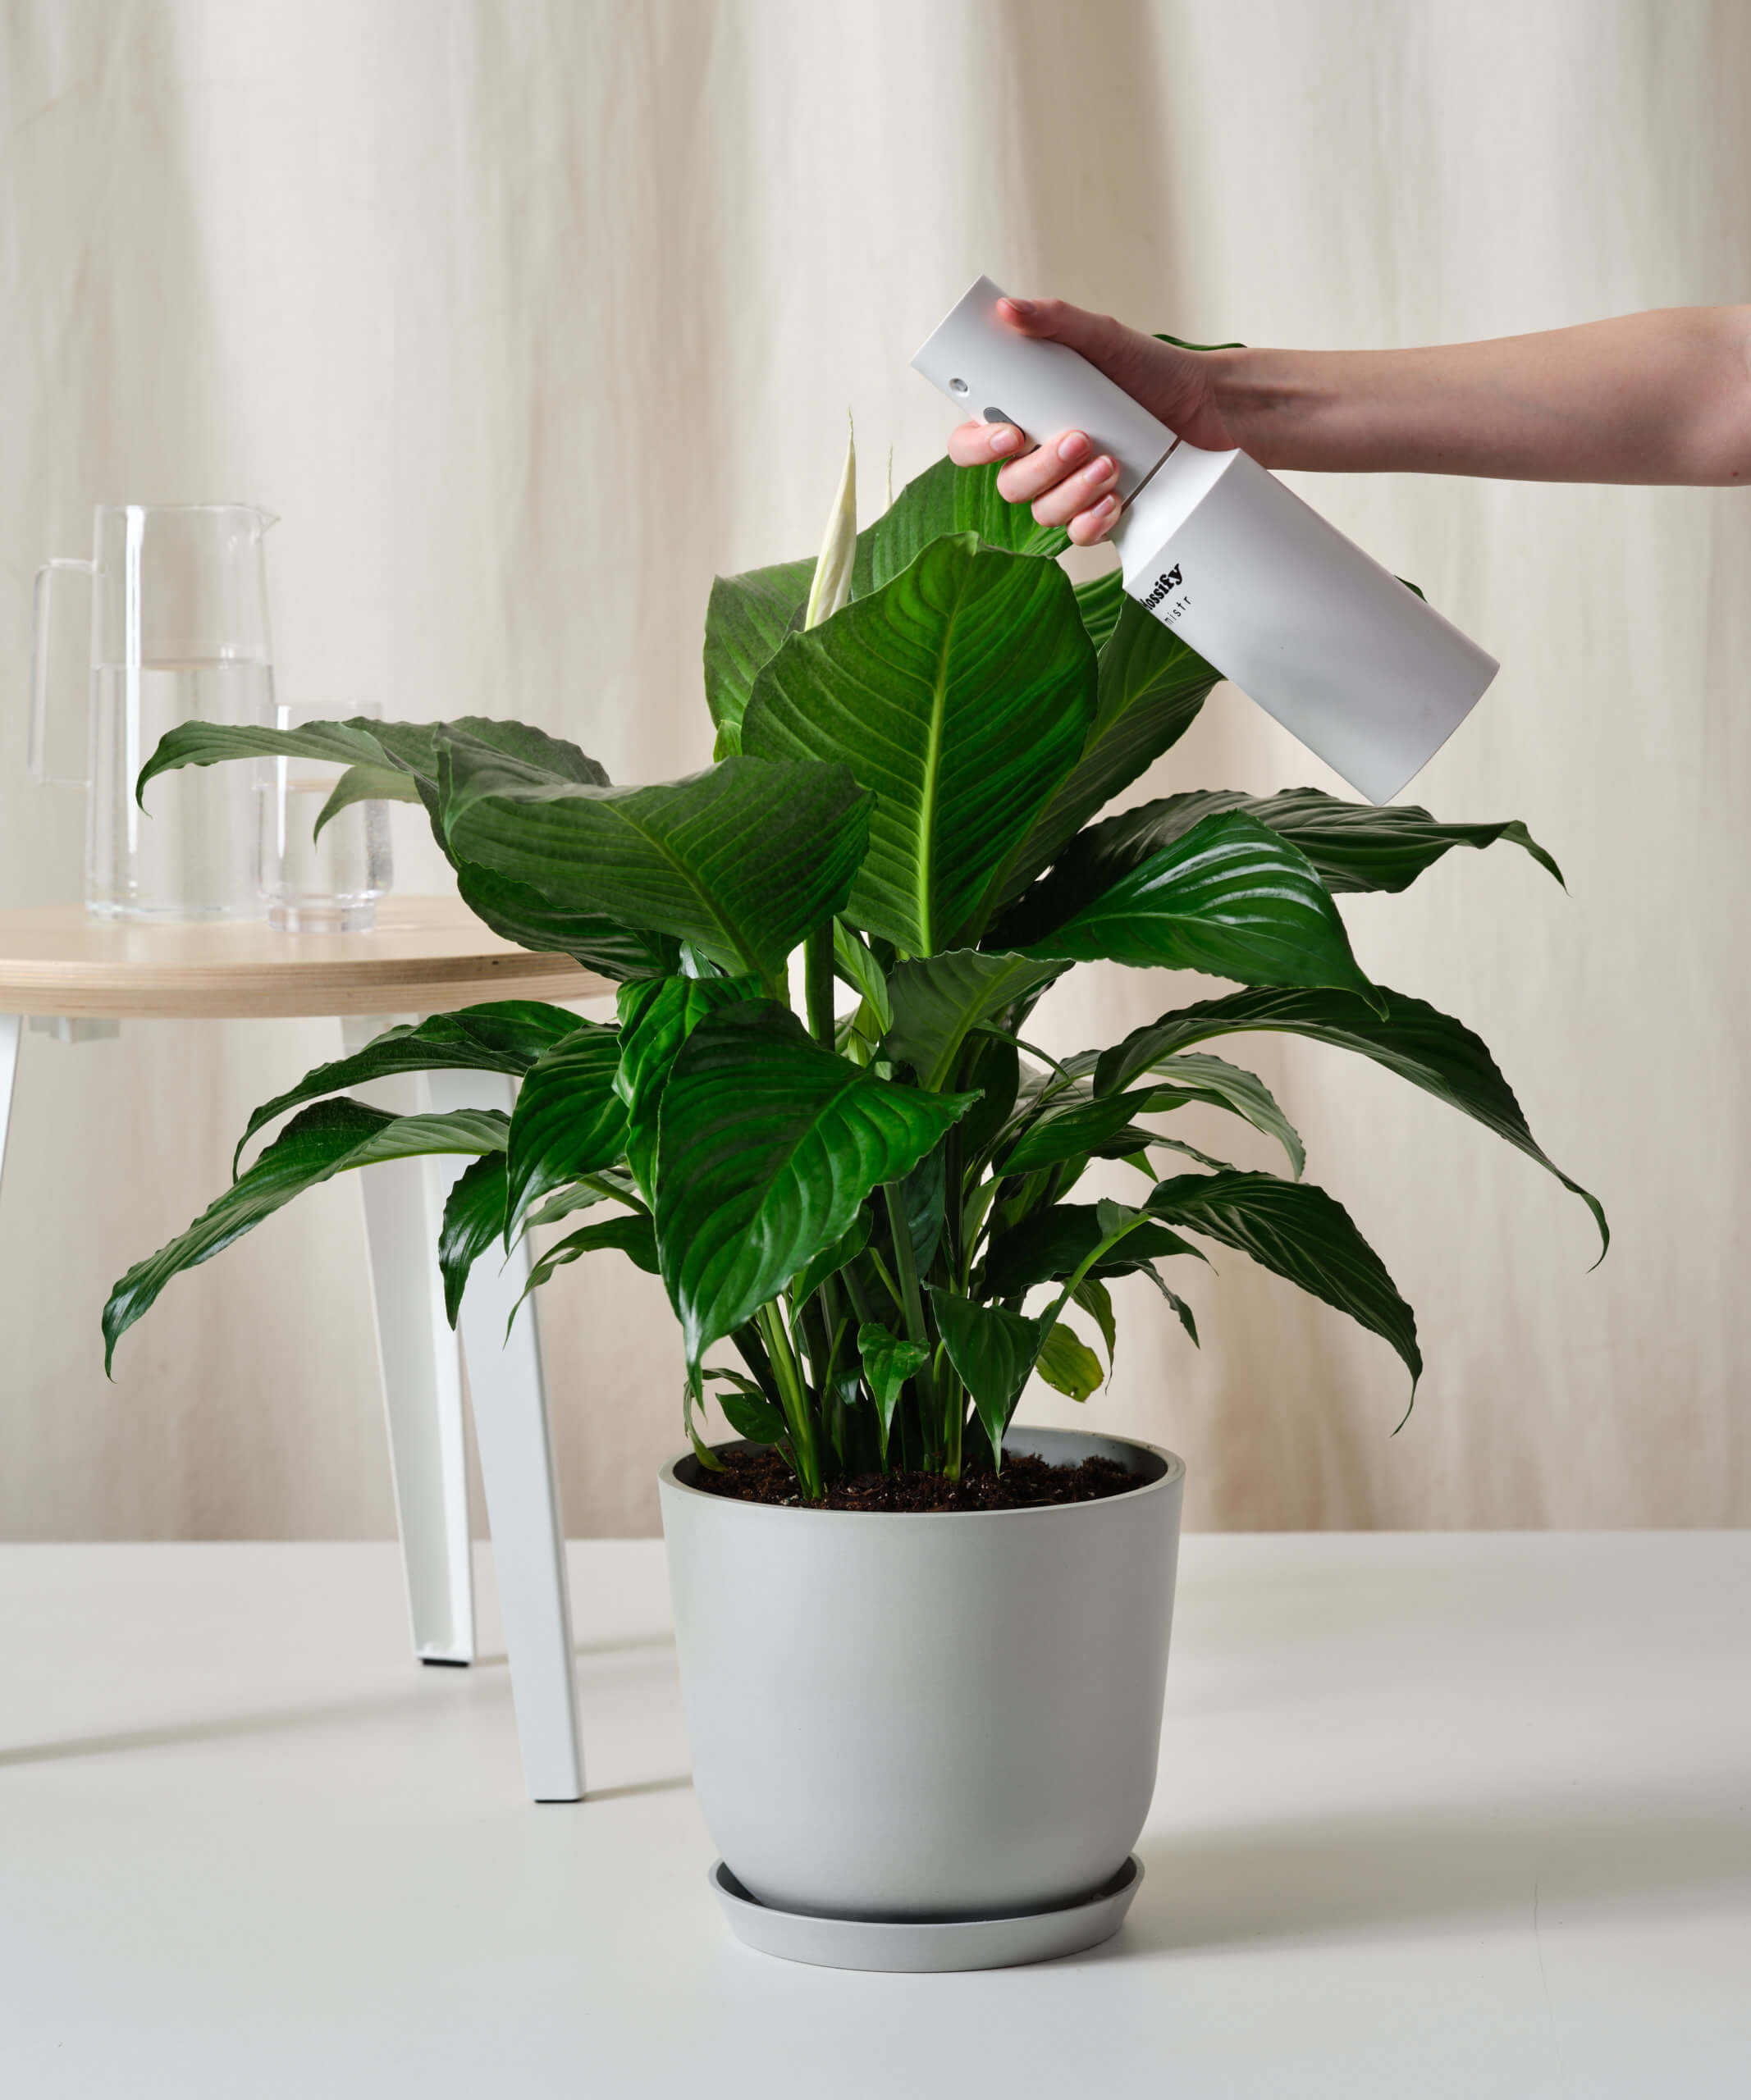 peace lily 101: how to care for peace lilies | bloomscape